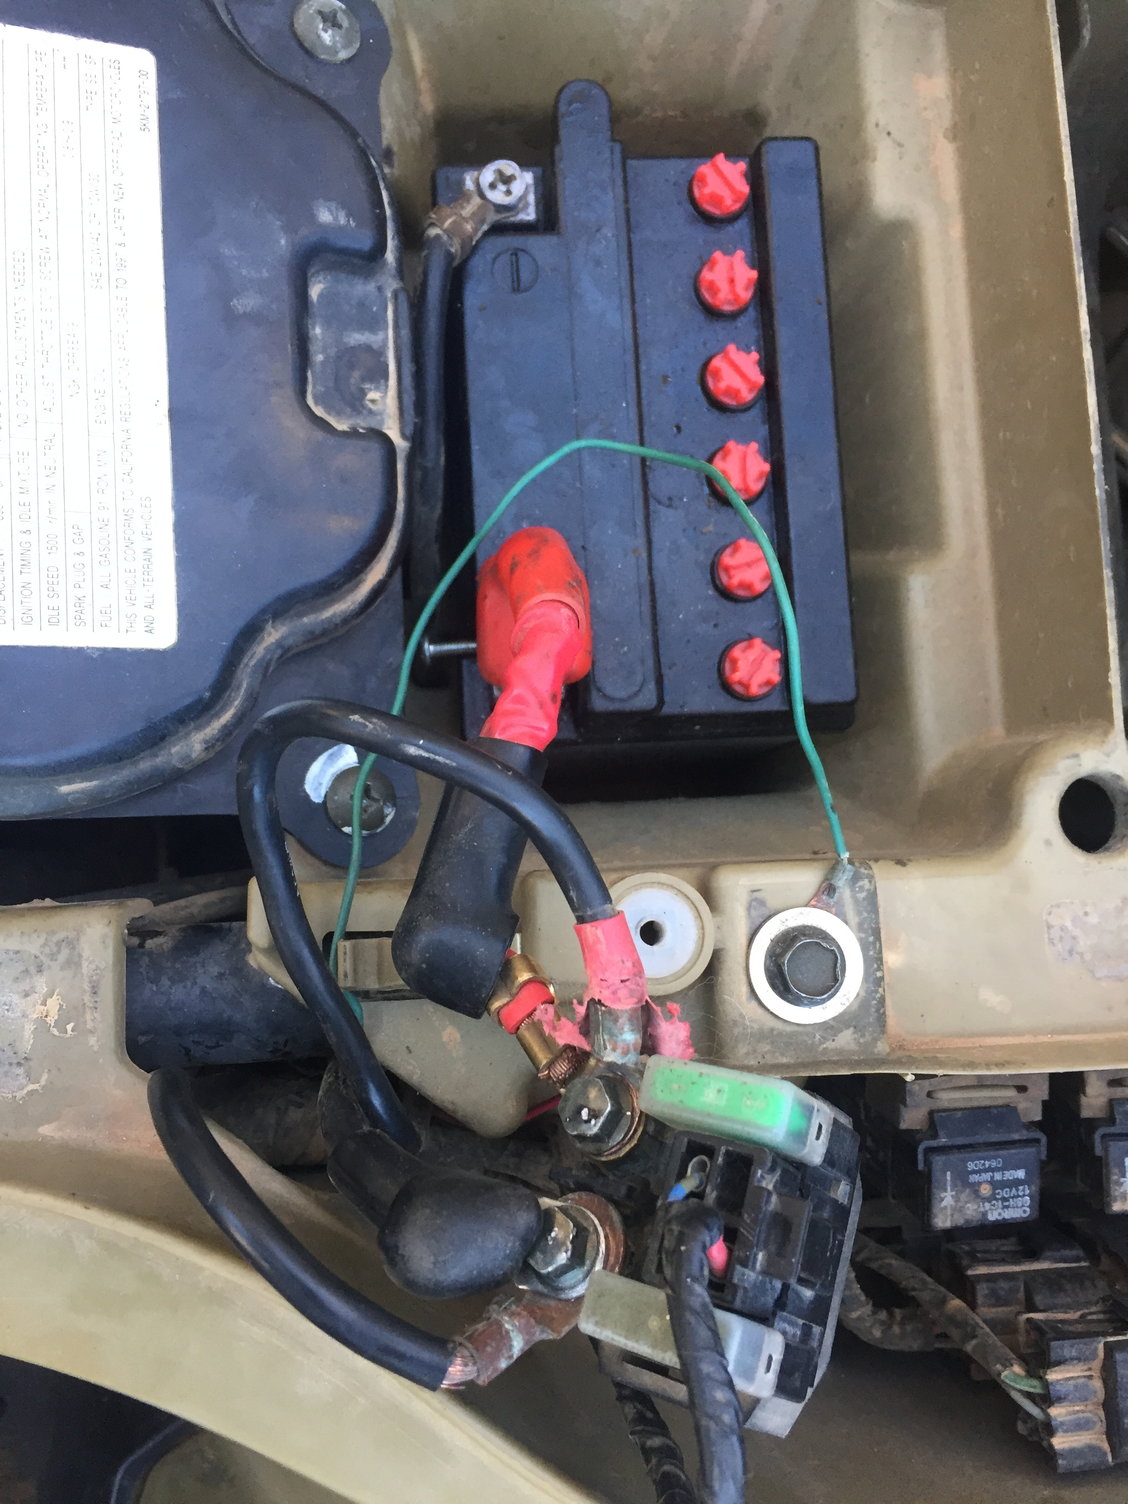 Grizzly batt soln wiring help - ATVConnection.com ATV Enthusiast Community